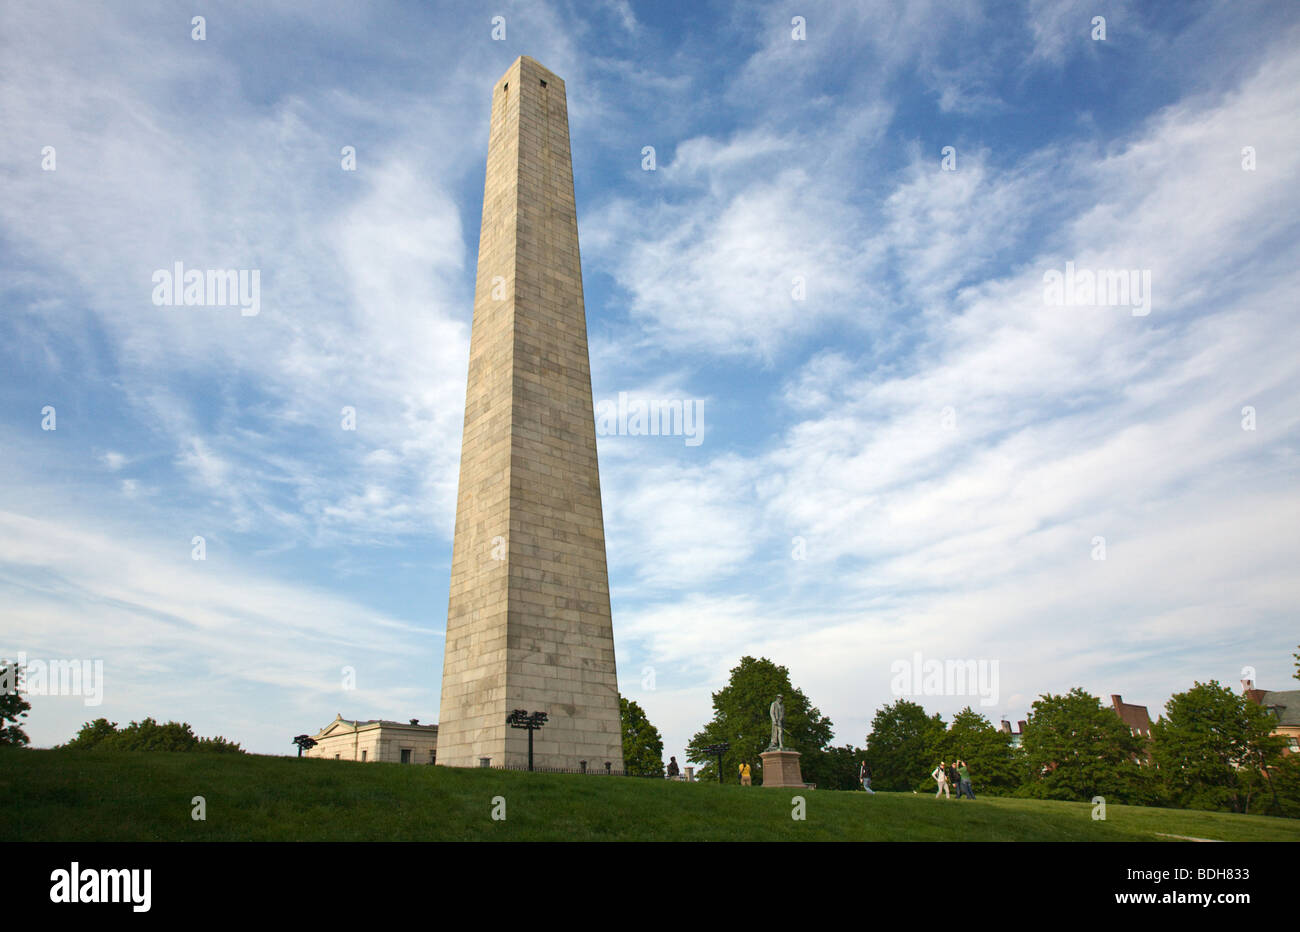 The GRANITE OBELISK at the BUNKER HILL MONUMENT located on Breeds Hill commemorates the heros of the Revolutionary War - BOSTON Stock Photo